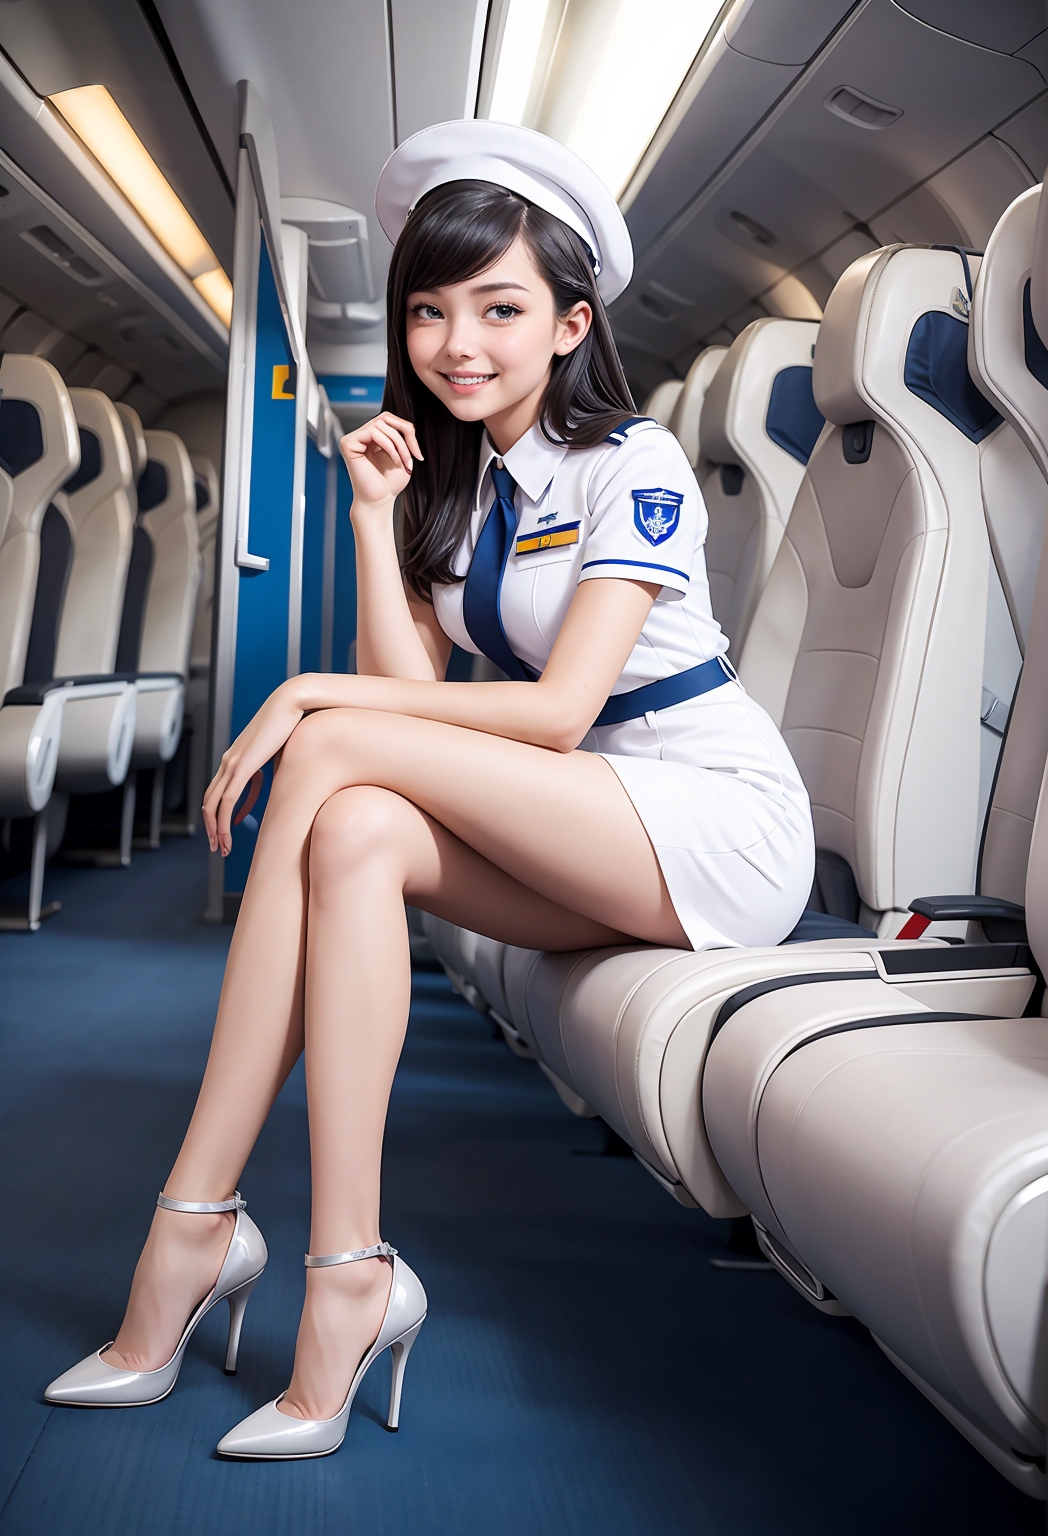 Heels only for female cabin crew unless they have a doctor's note, airline  says